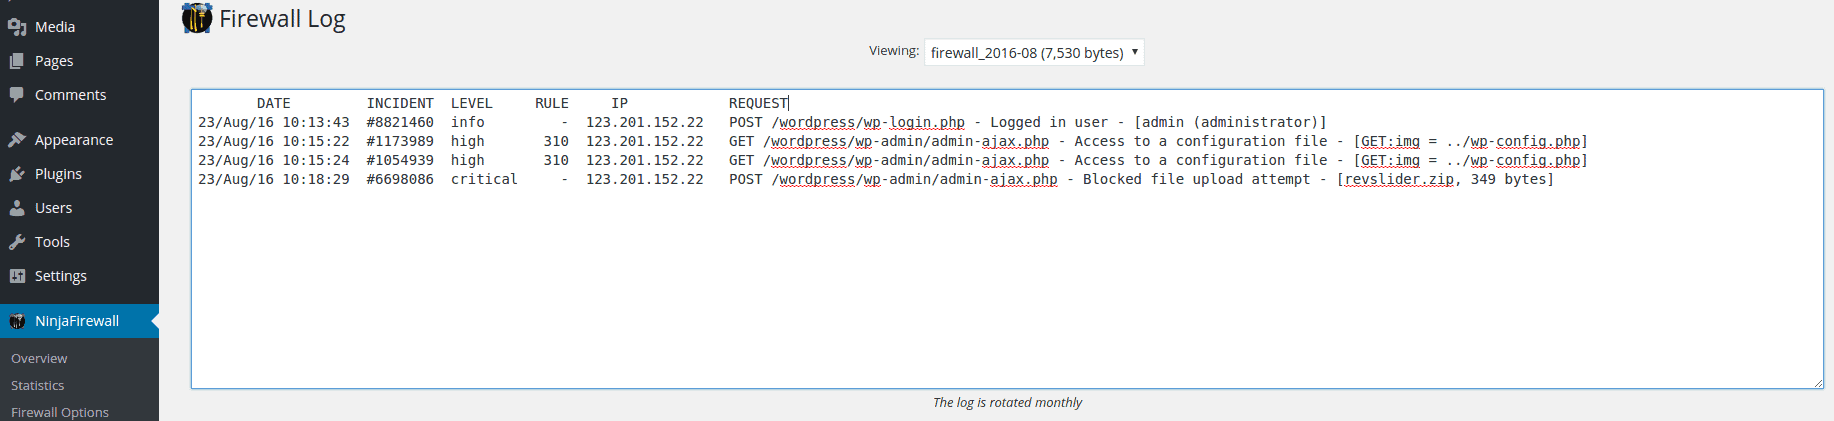 The Firewall Log for Arbitrary File Uploads